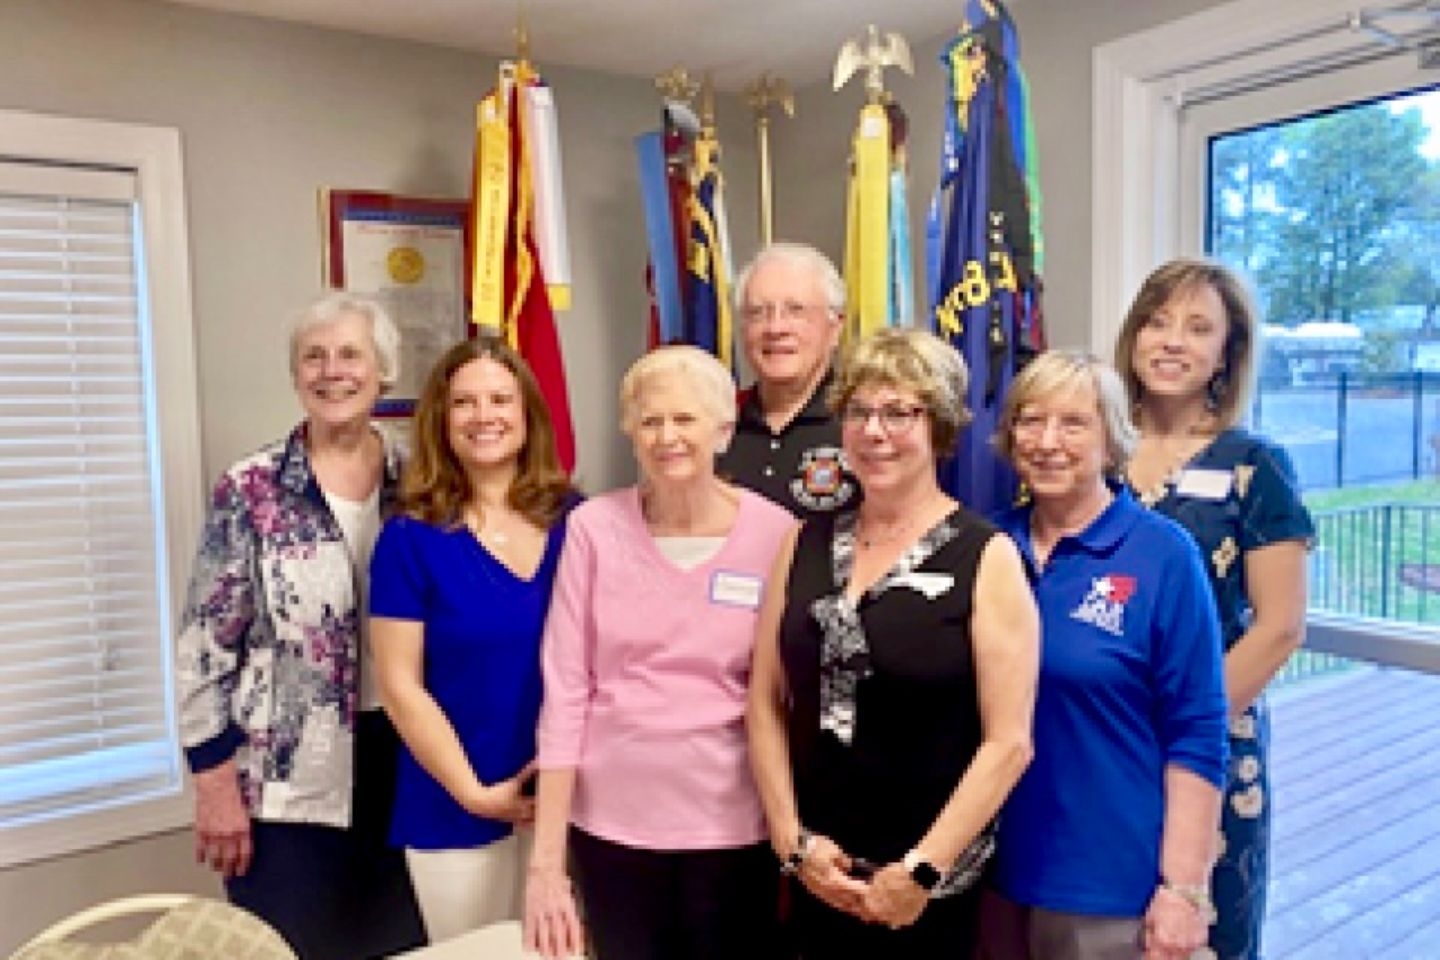 The General James Moore Chapter of the Daughters of the American Revolution of Wake Forest provided dessert for Post 8466's monthly meeting.